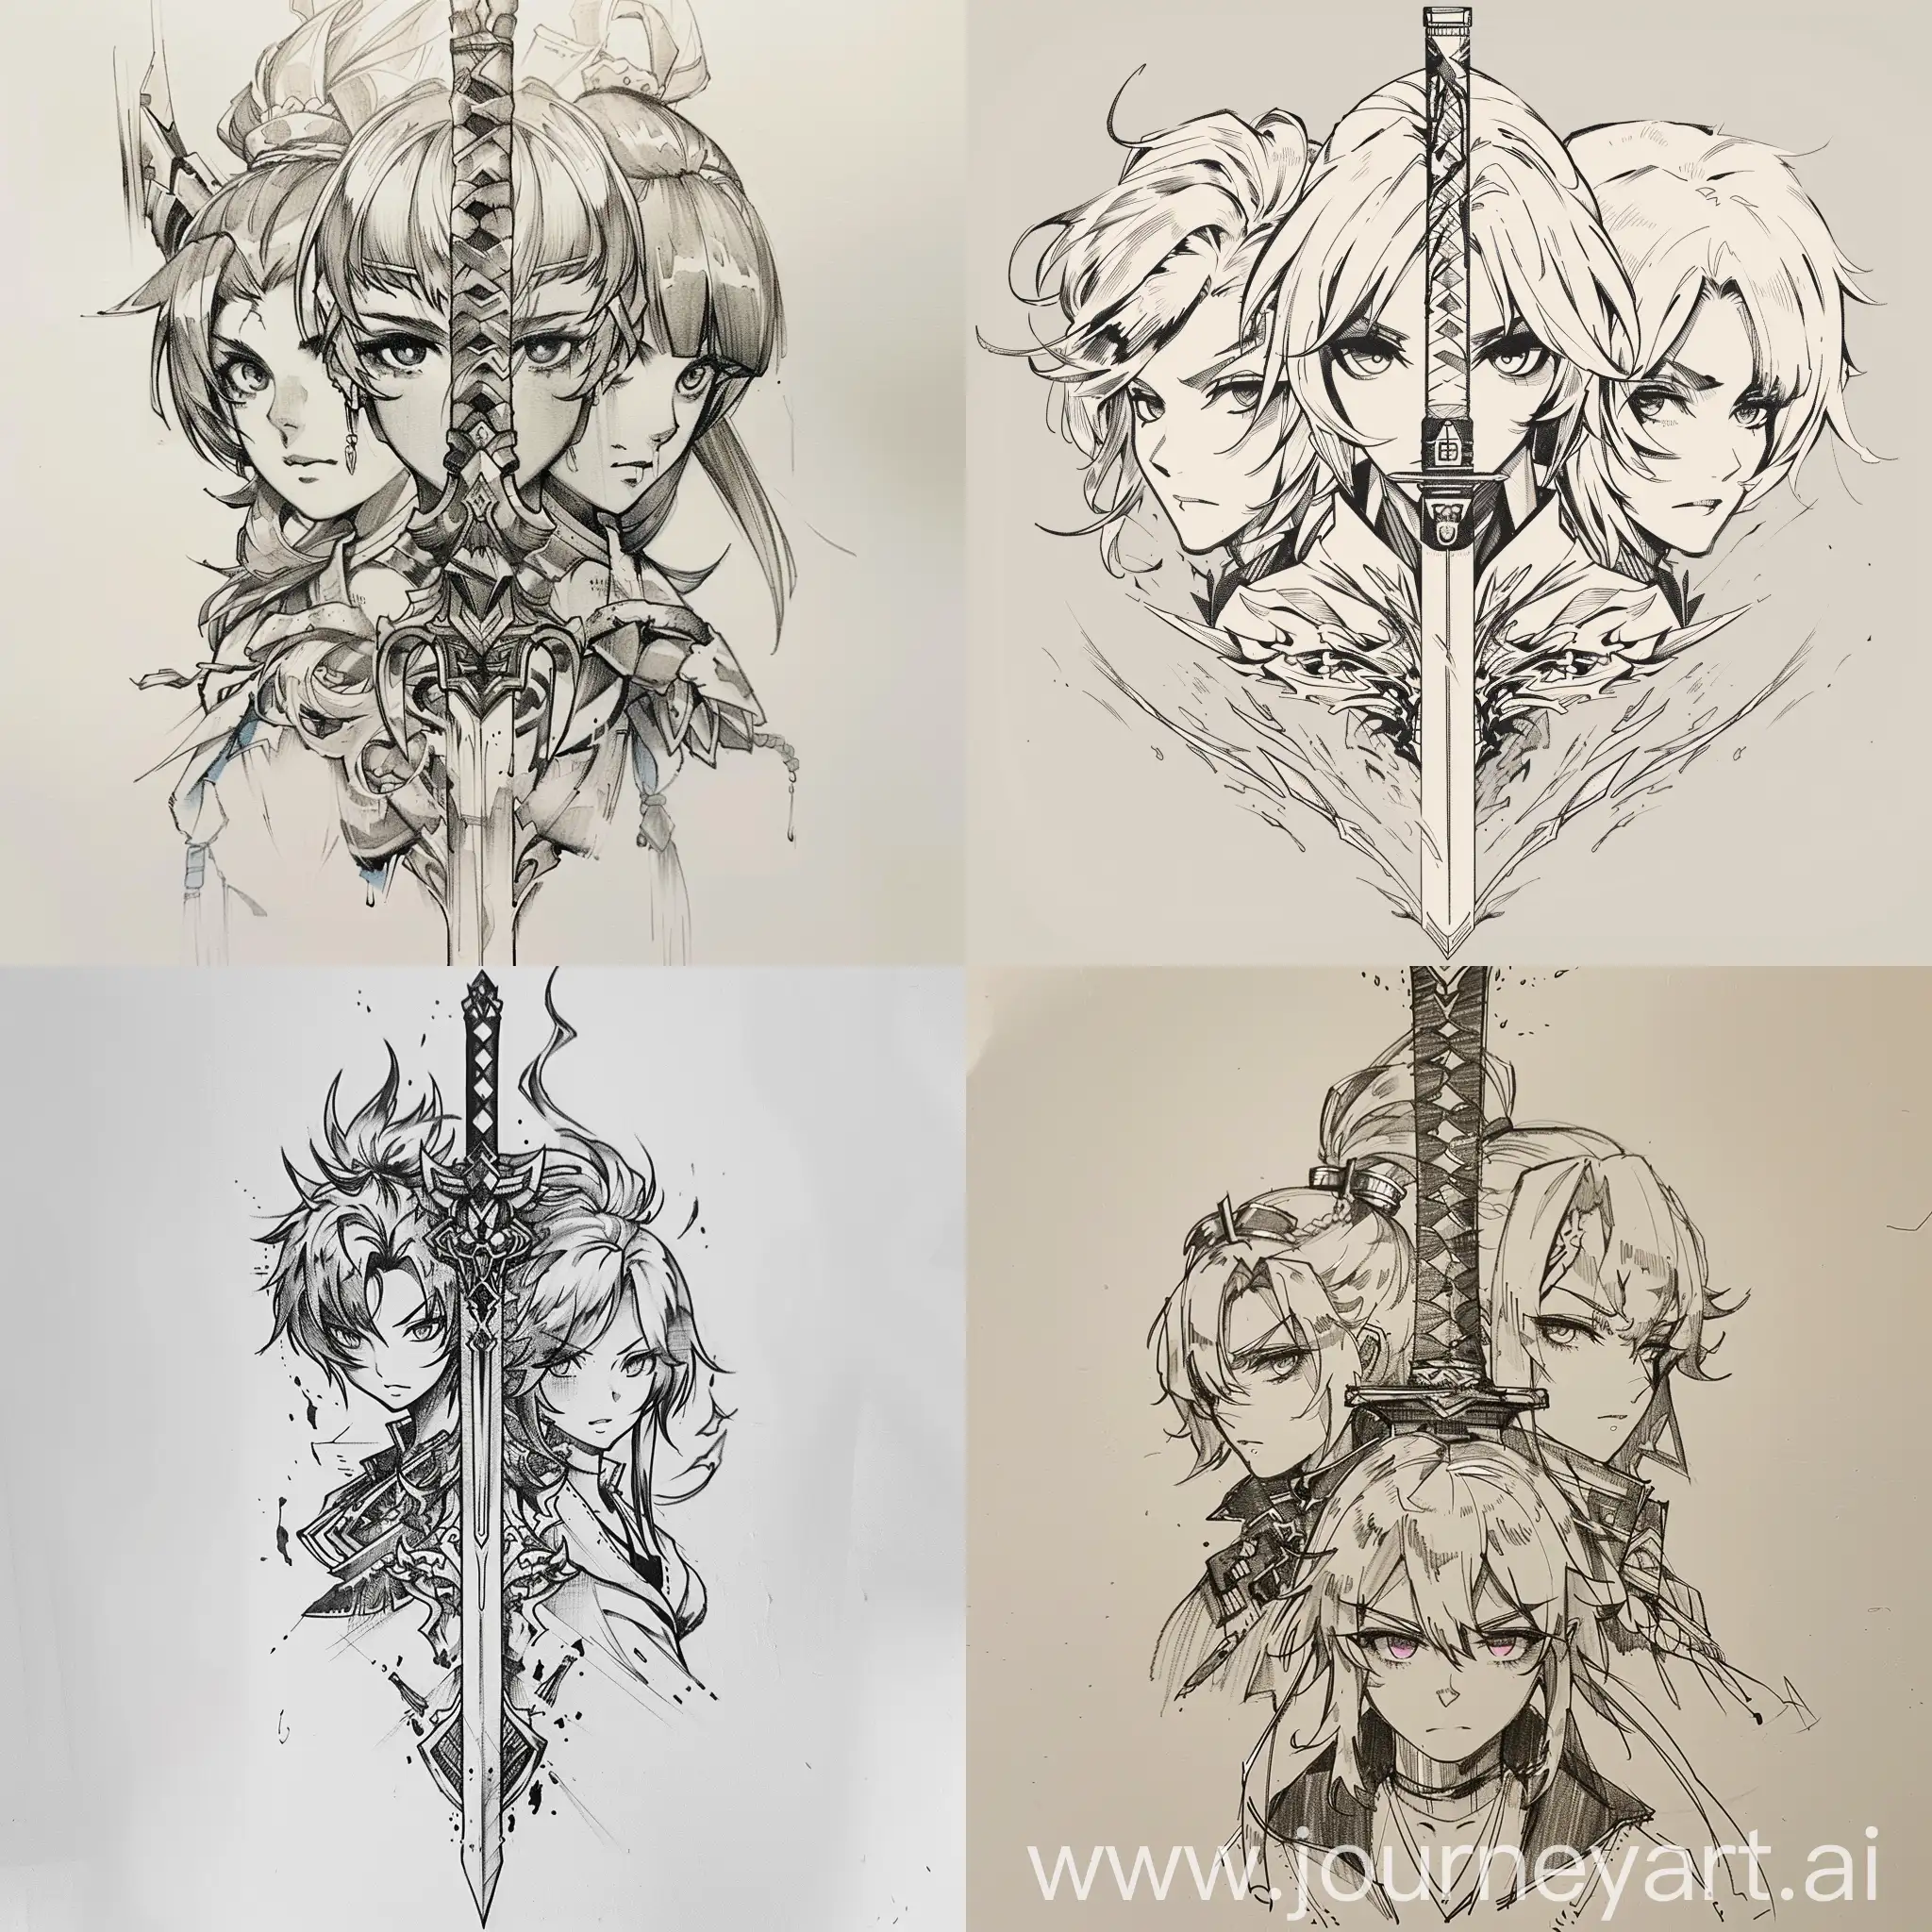 Tattoo Sketch: A katana in the center with three character heads aligned along the blade. Raiden Mei from Honkai Impact 3rd, Raiden Shogun from Genshin Impact, and Acheron from Honkai Star Rail. The heads should be arranged vertically along the katana, facing forward. All characters are female. Raiden Mei has stern facial features, sharp eyes, and flowing hair, with a serious and focused expression. Raiden Shogun has an imperial, fierce expression, intense and commanding purple eyes, and hair styled in a traditional samurai topknot. Acheron has a mystical and enigmatic look, with part of her face obscured by a hood, and faintly glowing eyes. All heads are depicted in black and white anime style. The katana is designed in traditional Japanese style, with intricate details on the hilt and blade. Style: anime, black and white, detailed facial features. Mood: strong, determined, with elements of mysticism and power. Size: medium, suitable for forearm or shoulder. Clear lines and detailed elements. All characters should be clearly recognizable as female.